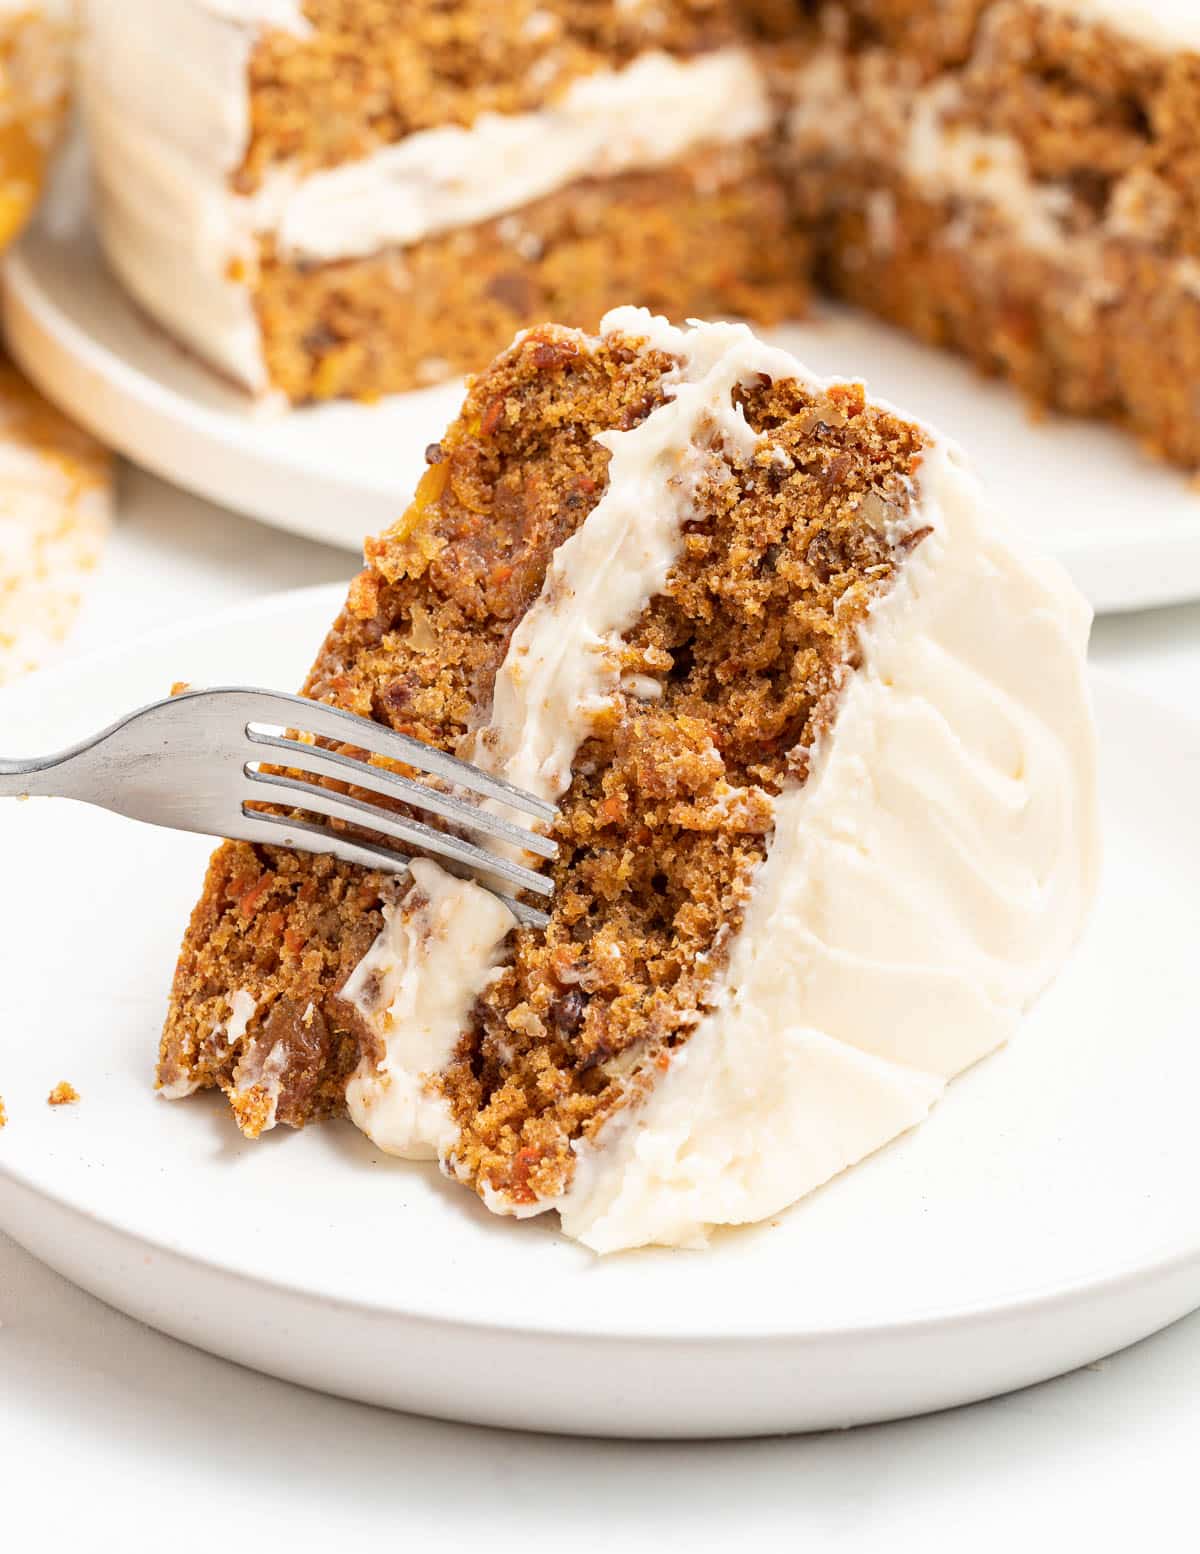 a slice of vegan carrot cake on a plate